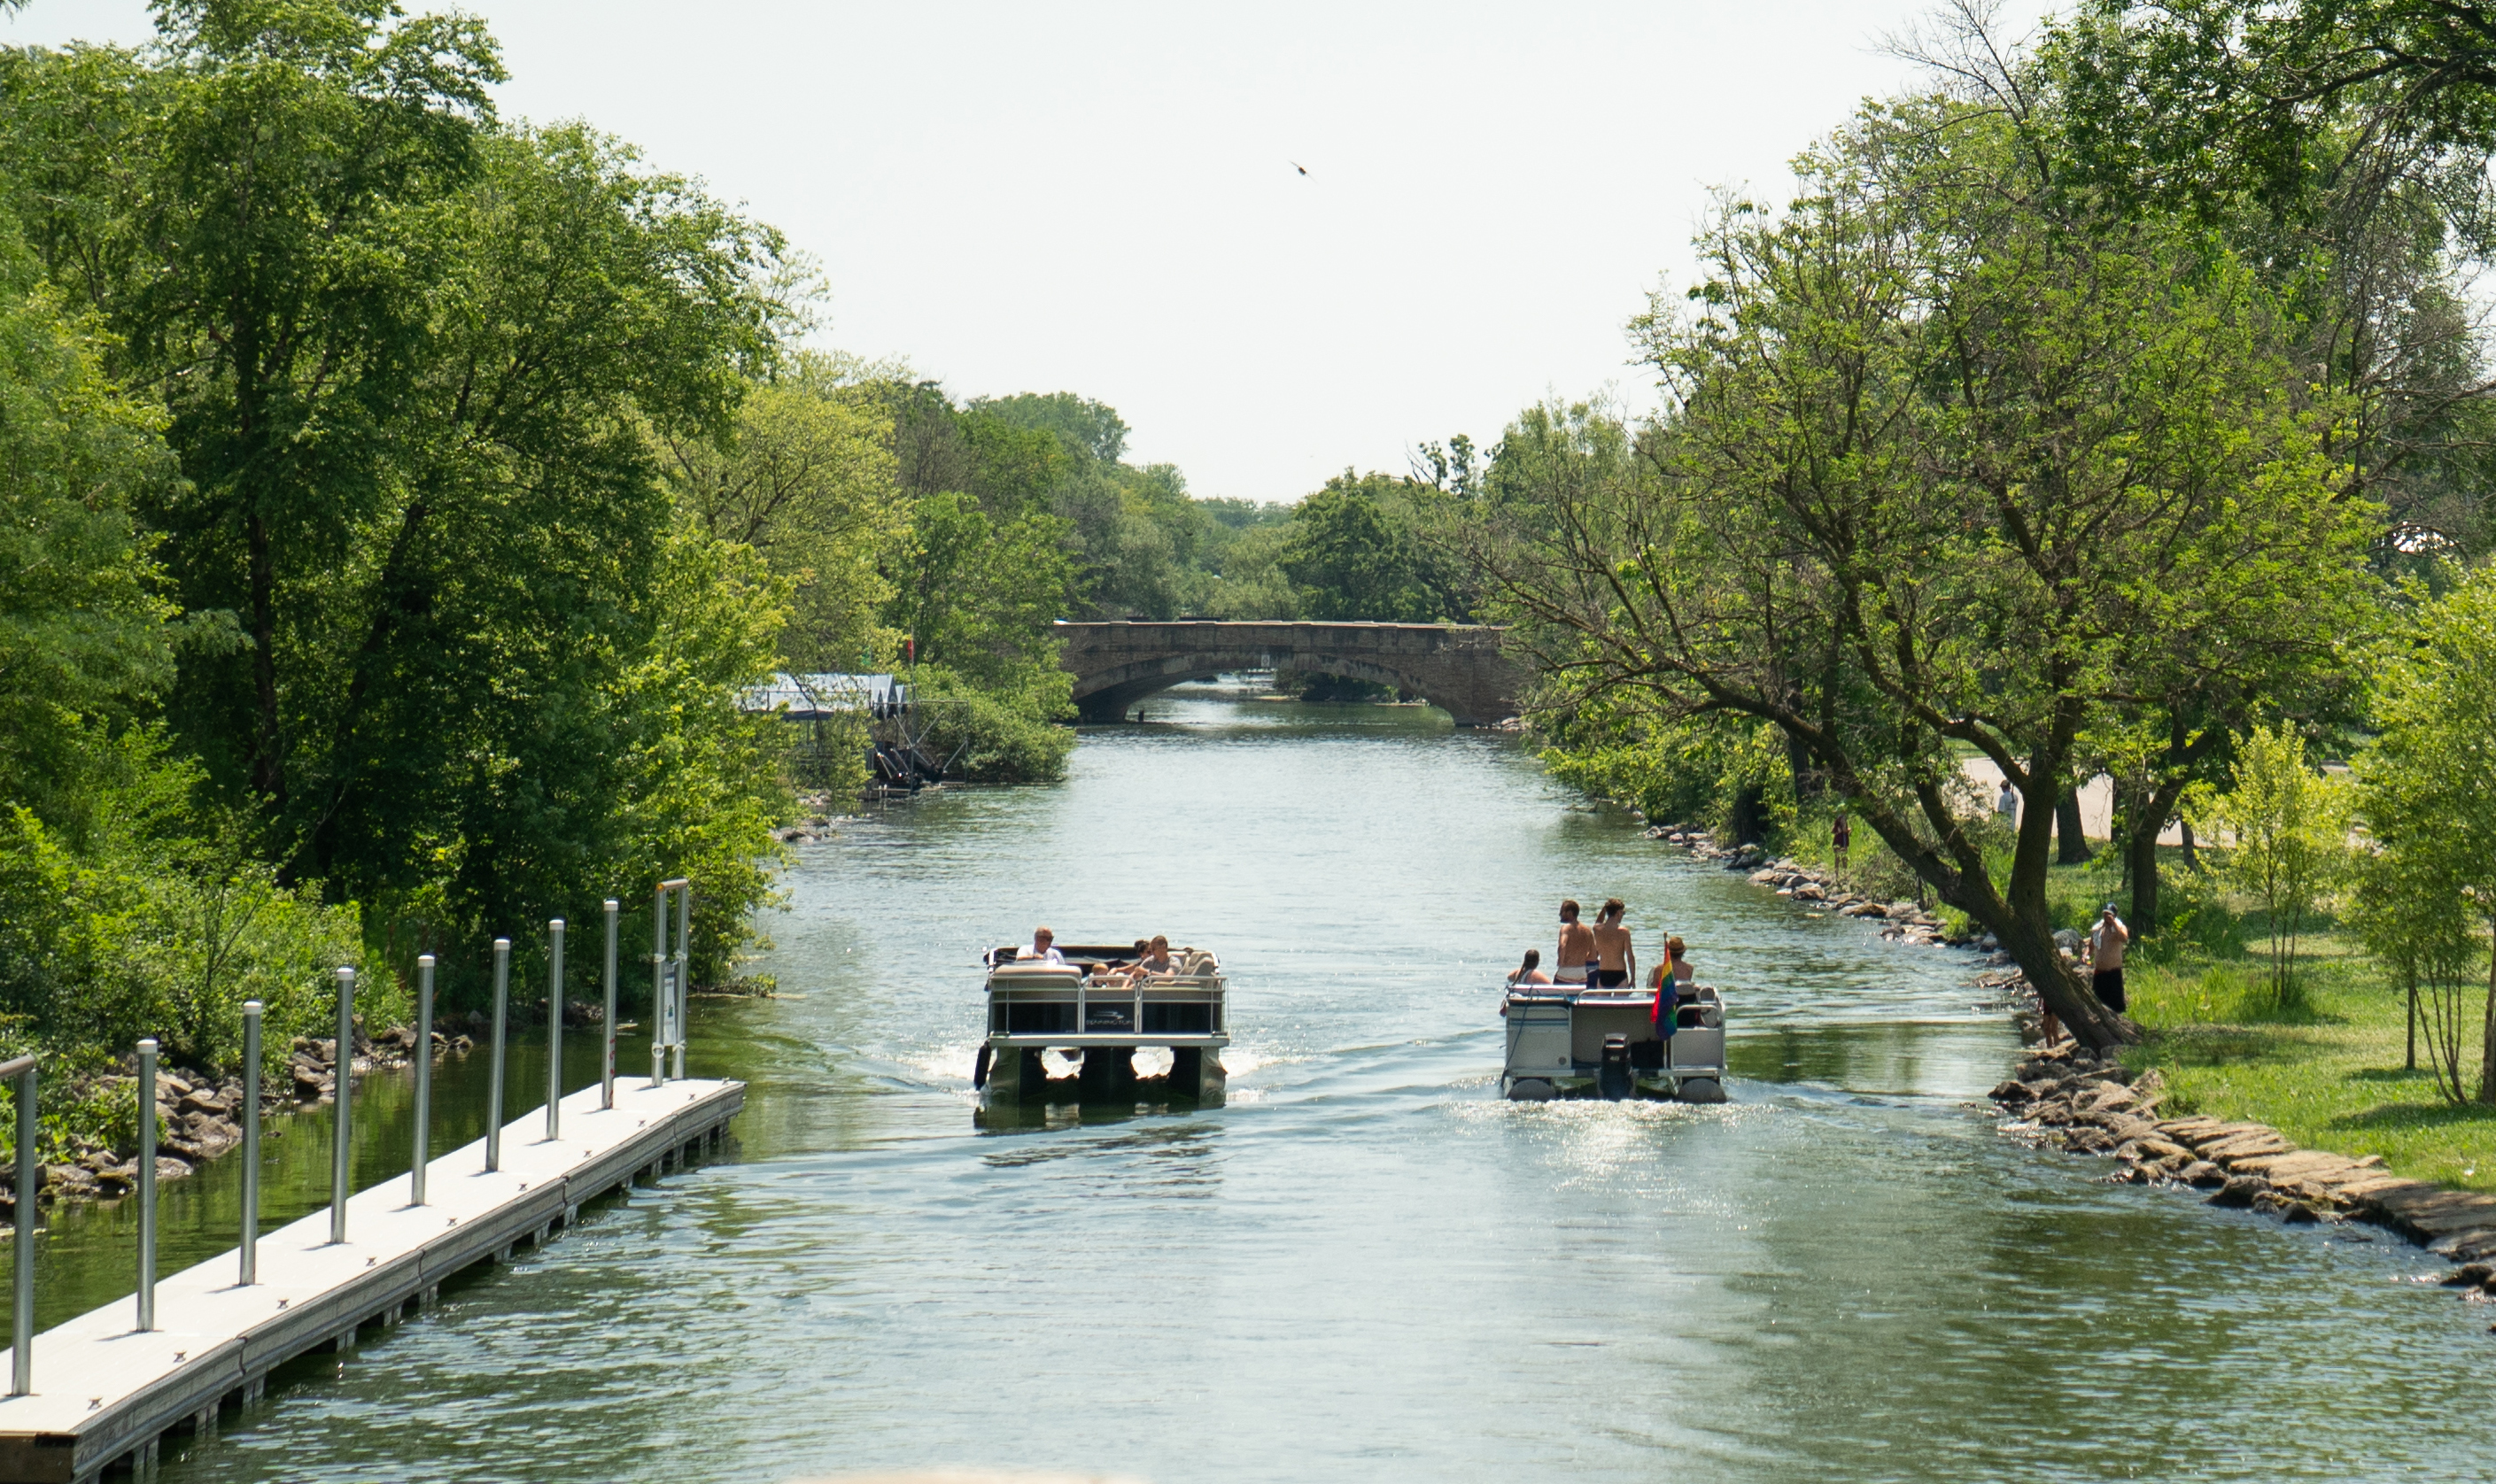 Two boats pass one another on the Yahara River